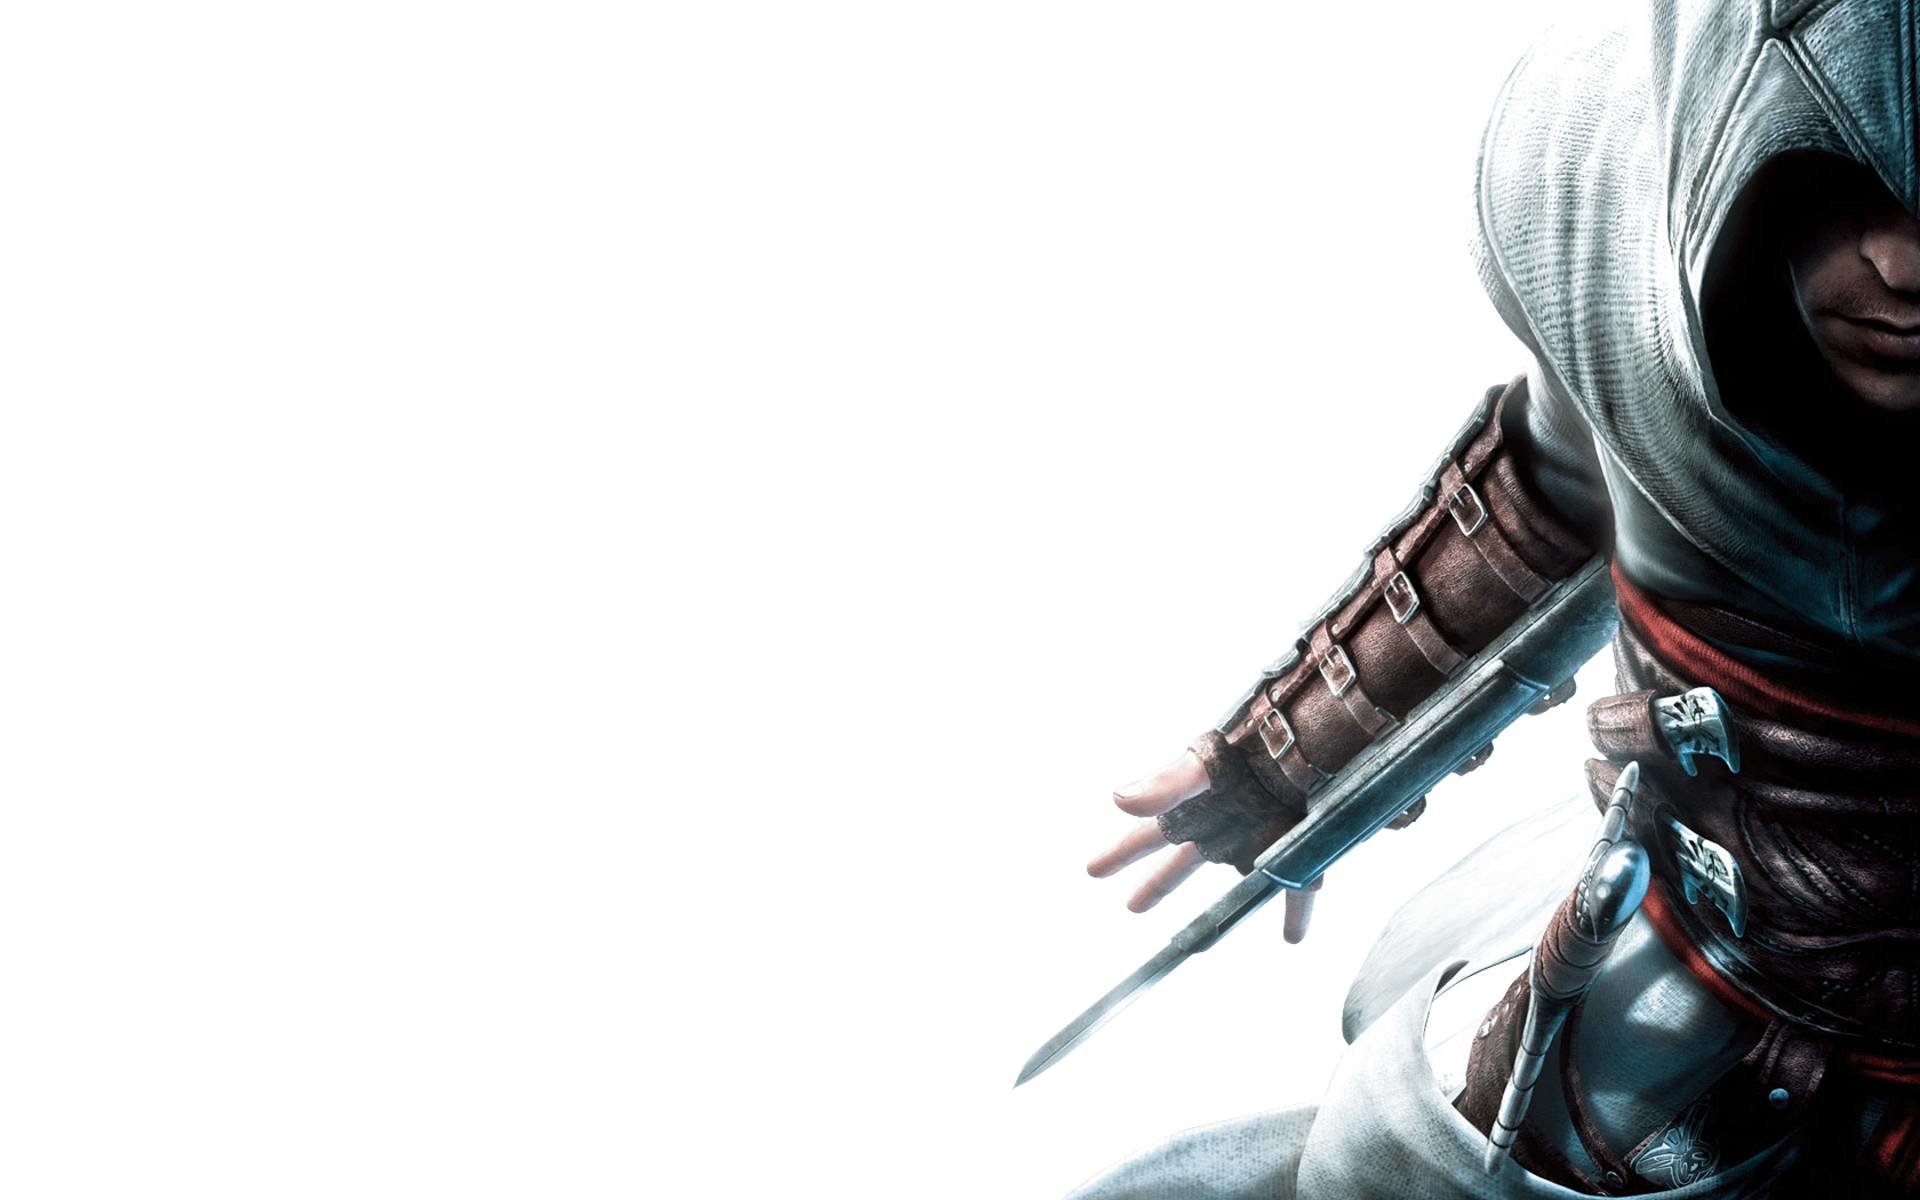 Assassin's Creed HD Wallpapers